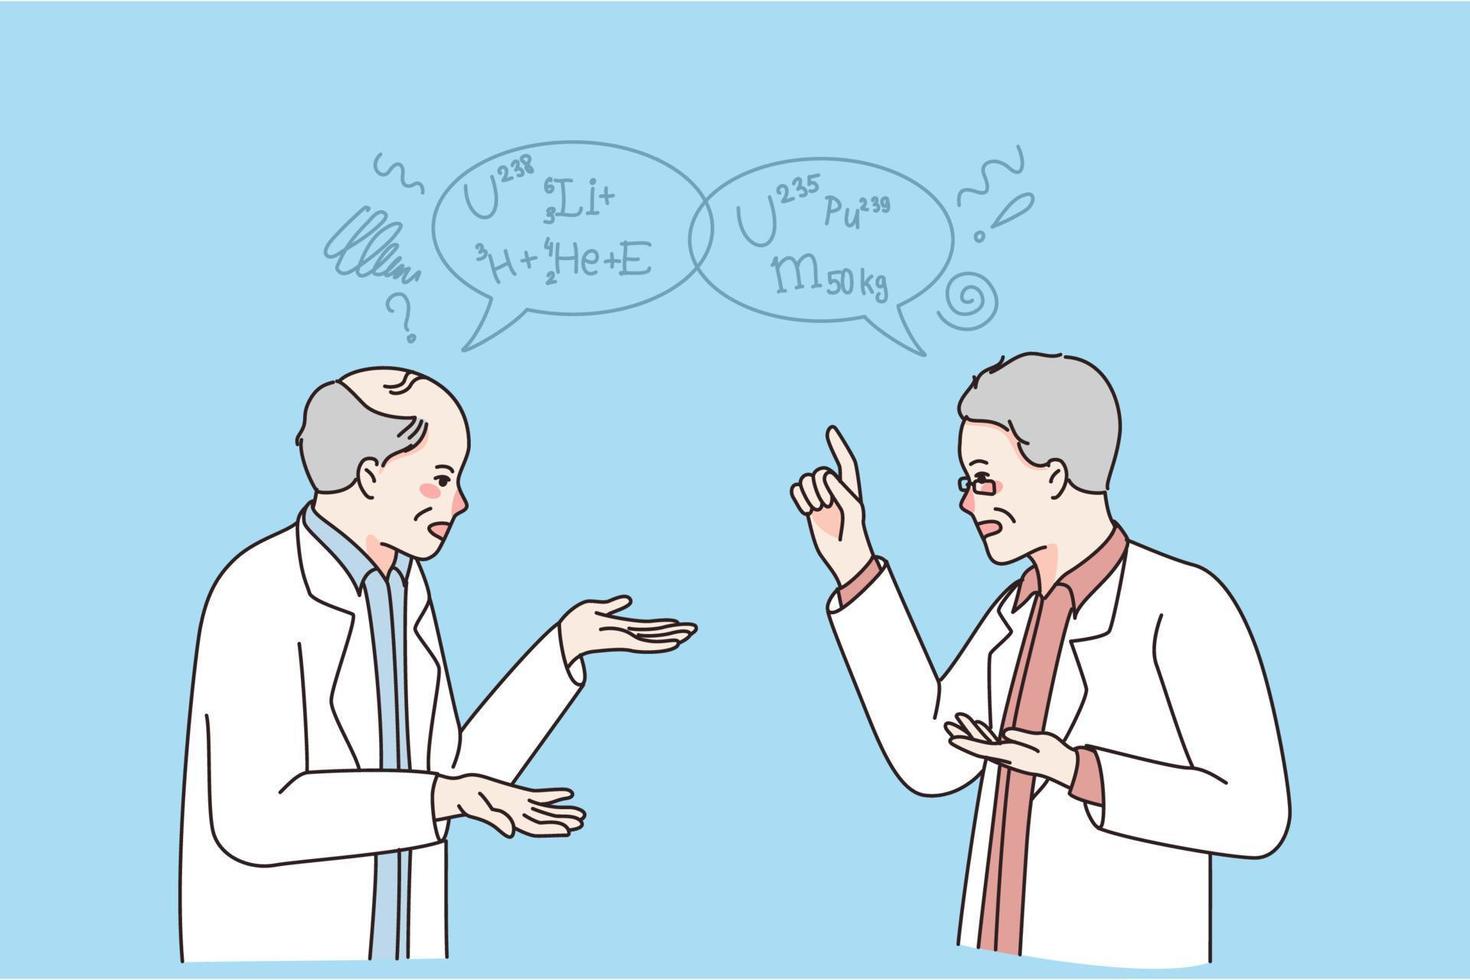 Scientist and scientific communication concept. Two men doctors scientists standing and chatting about chemicals with formulas flying above vector illustration